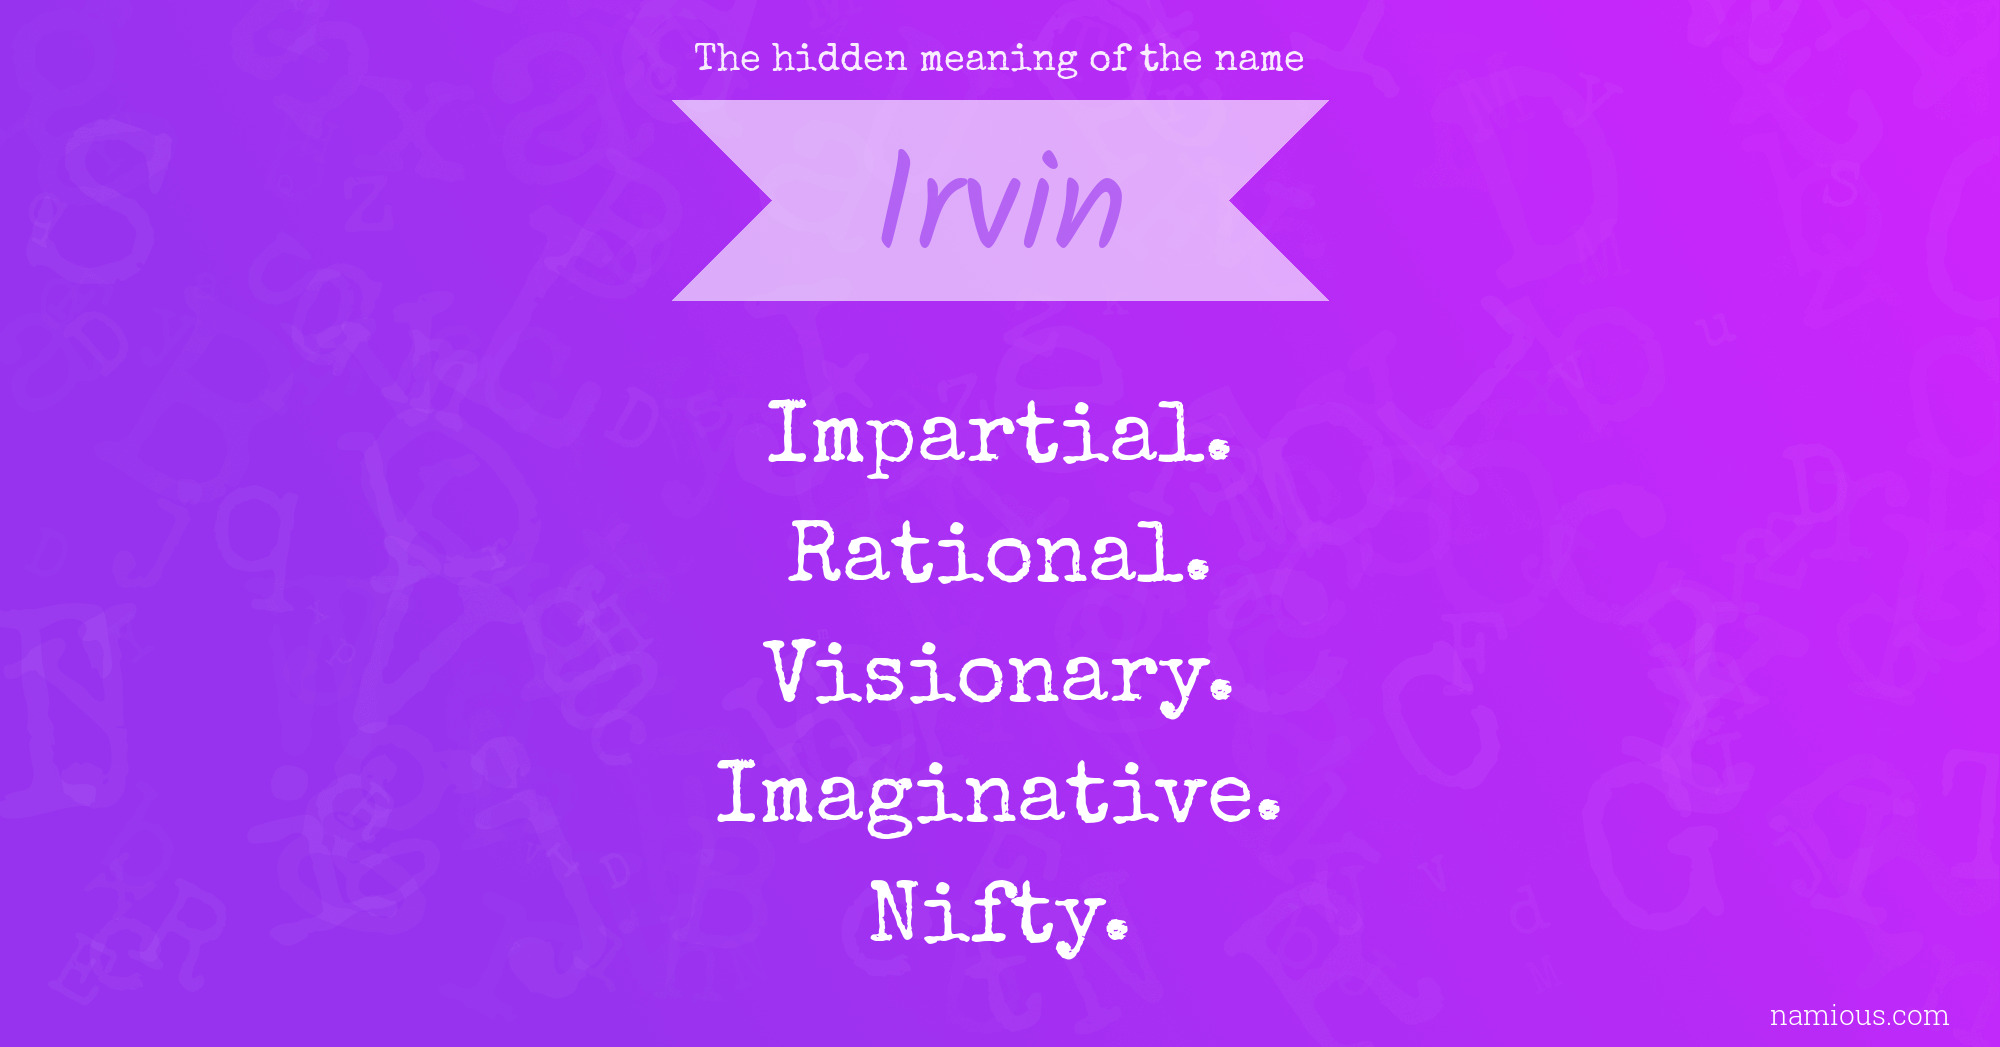 The hidden meaning of the name Irvin